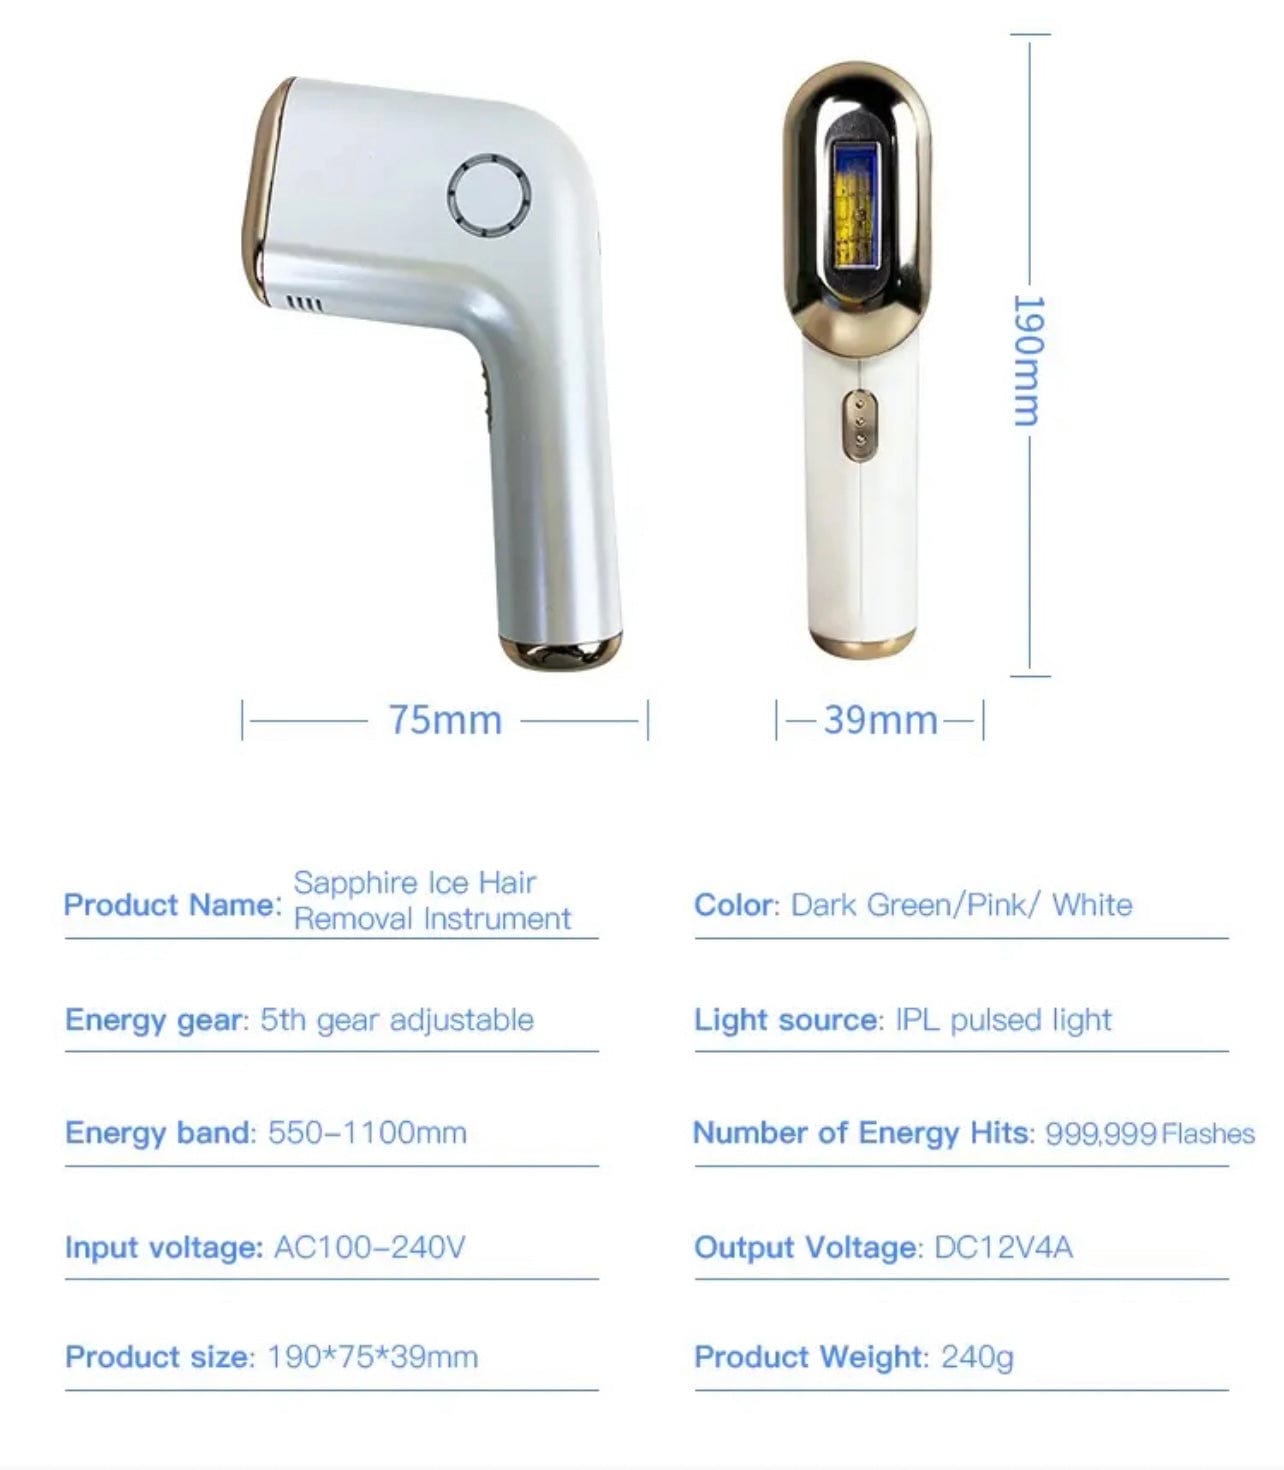 Optical grade sapphire ice hair removal device (usual price $300, for jemaime customers is $250)